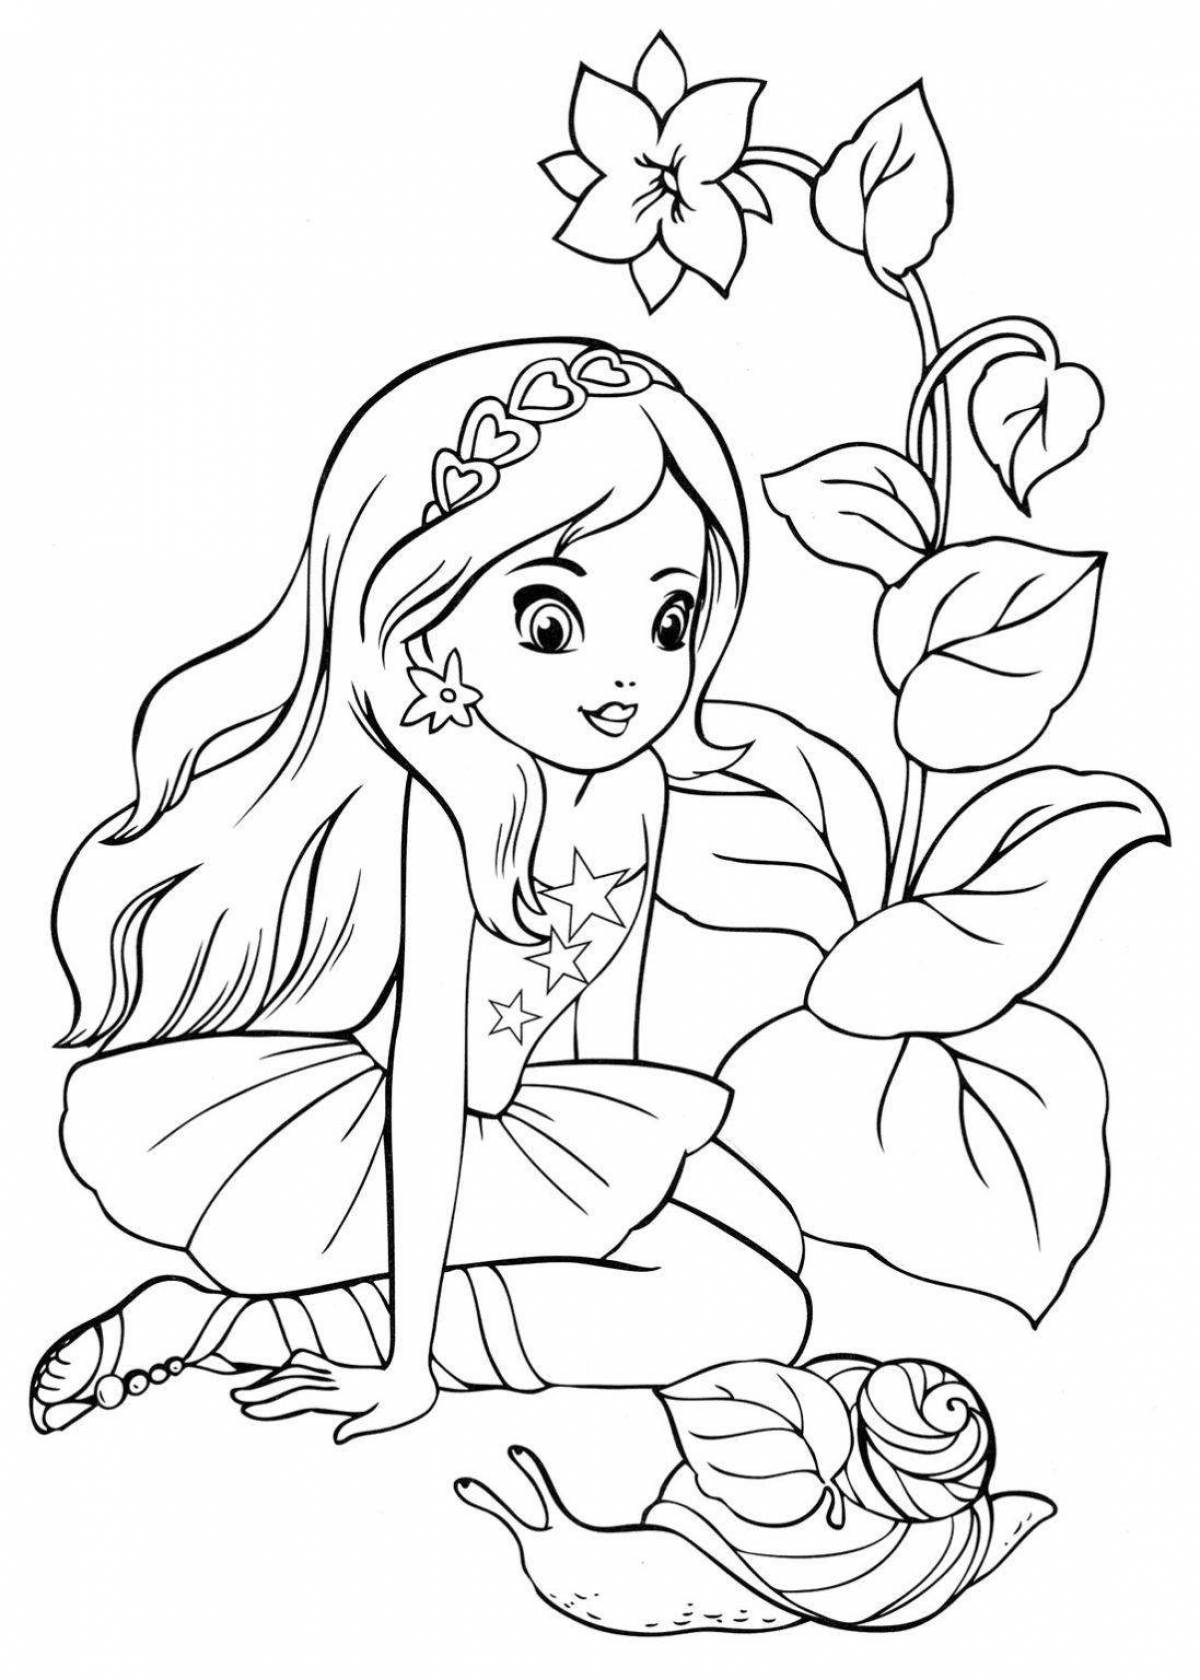 Cute coloring book for girls 5-7 years old